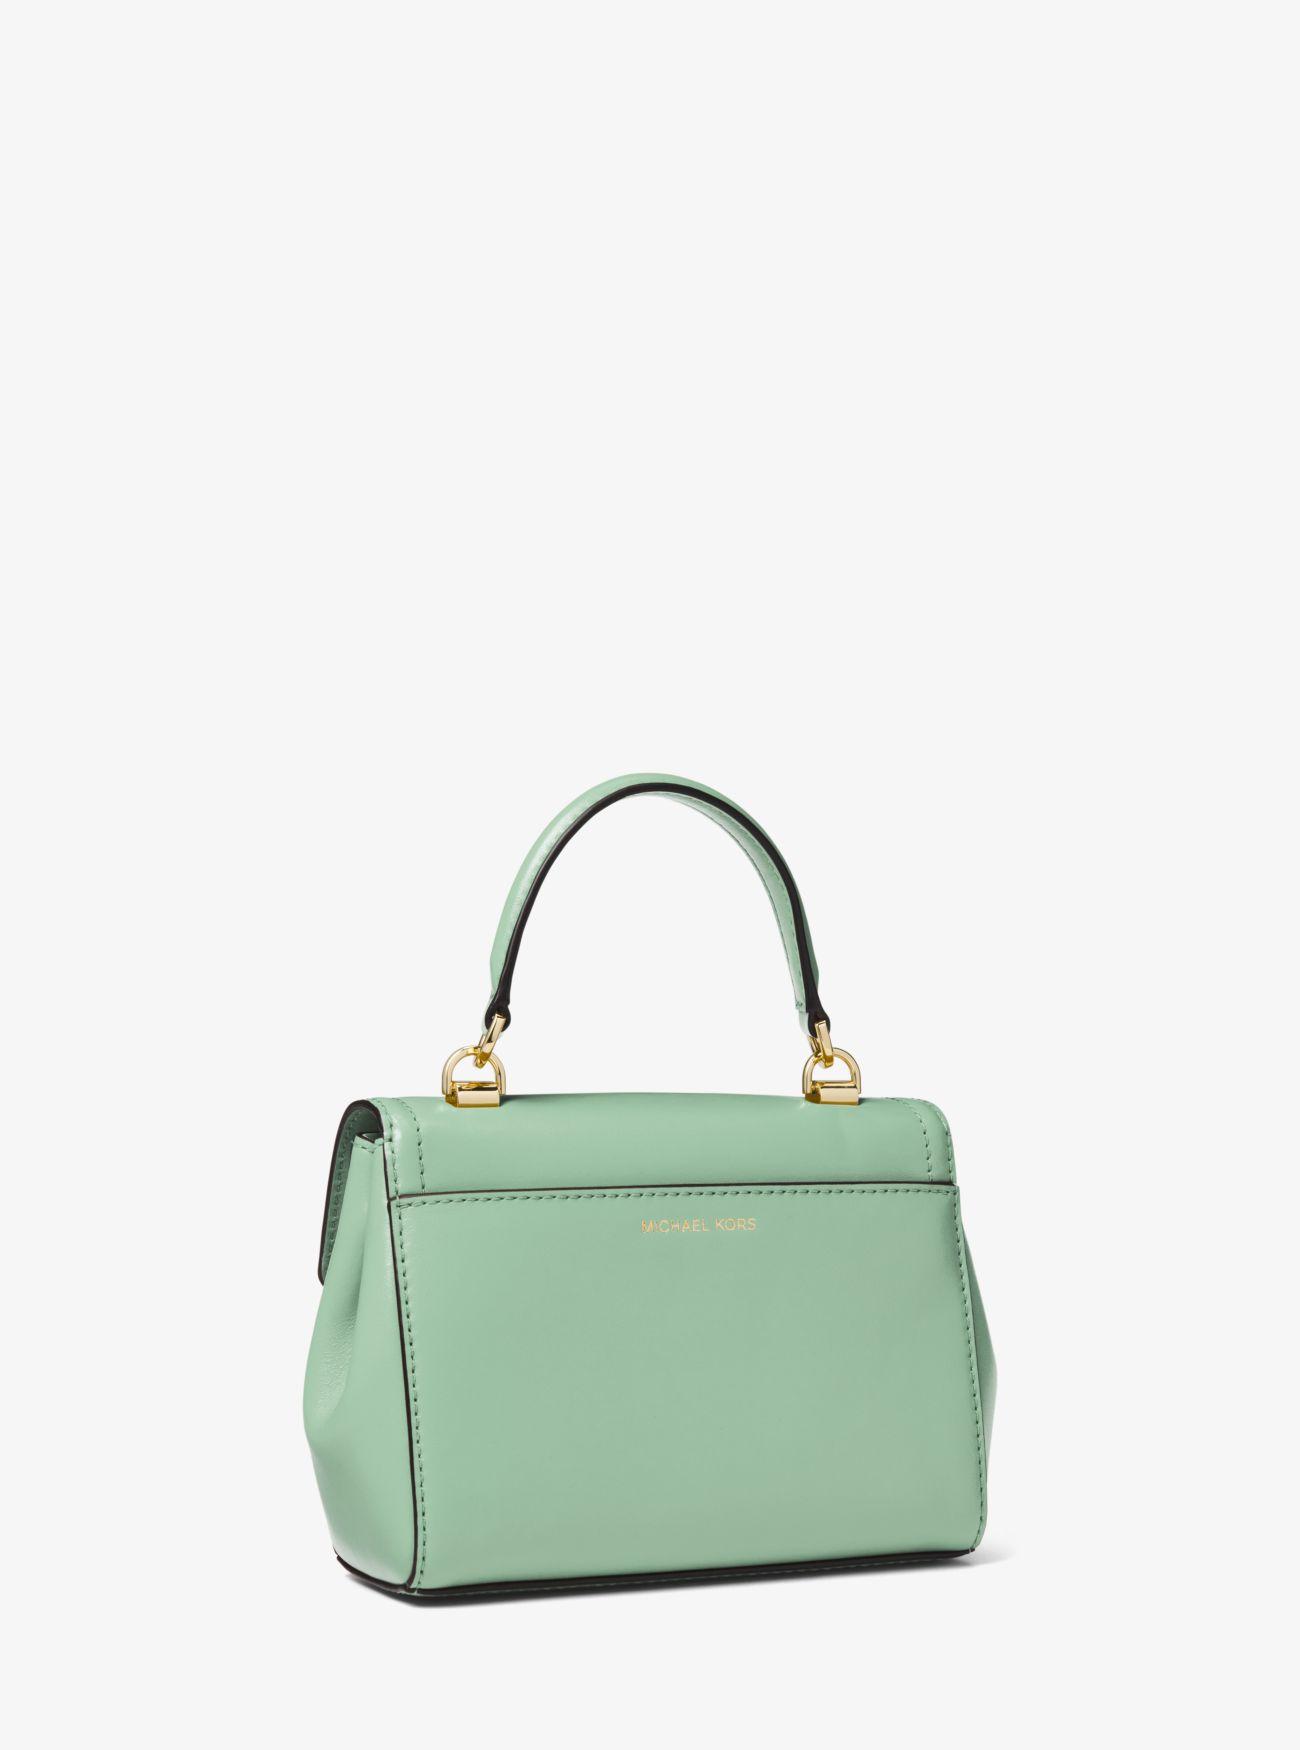 MICHAEL Michael Kors Ava Extra-small Leather Crossbody Bag in Green - Lyst